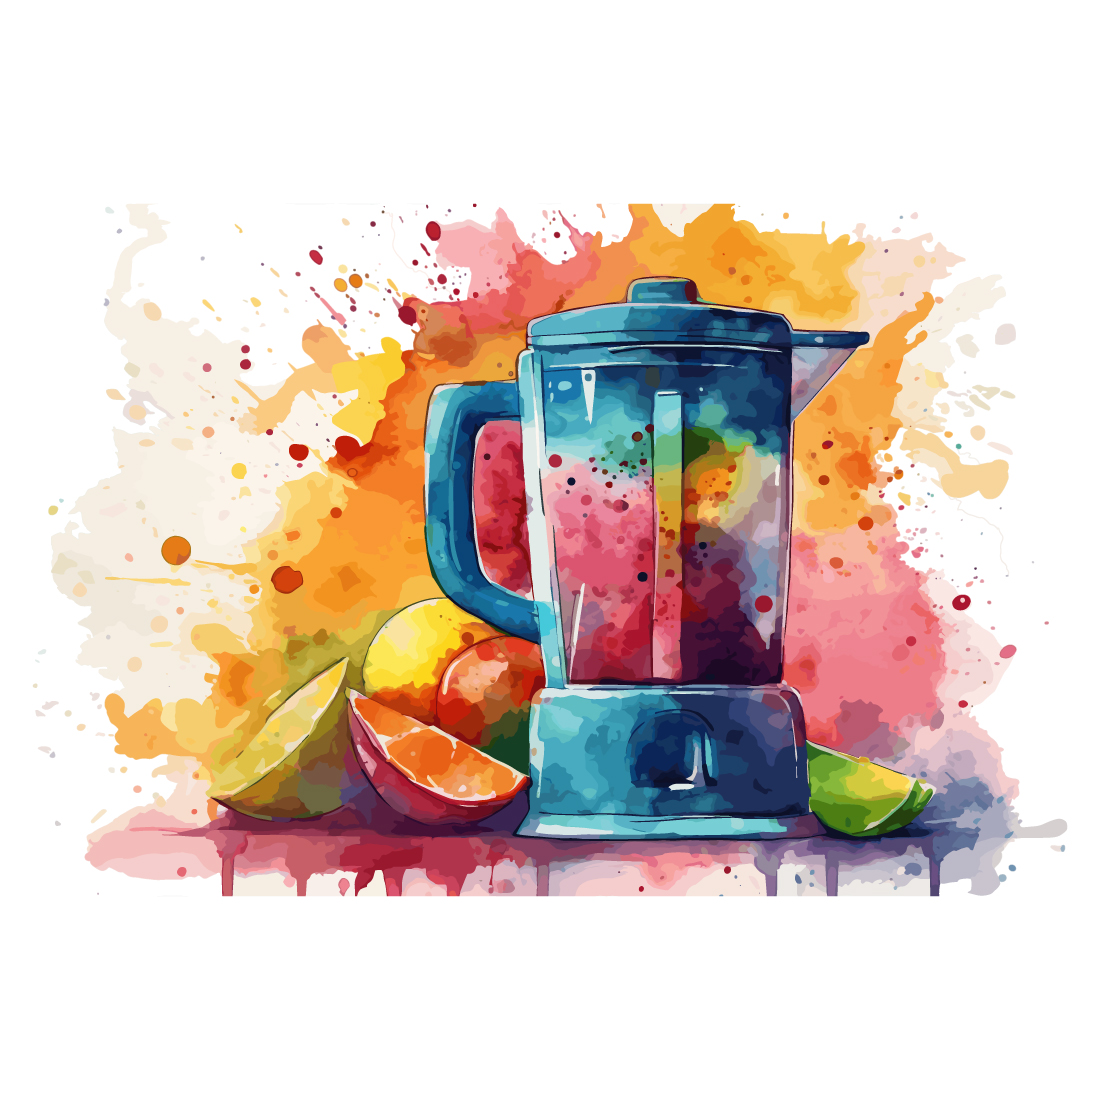 Electrical Juicer Blander machine with splash watercolor preview image.